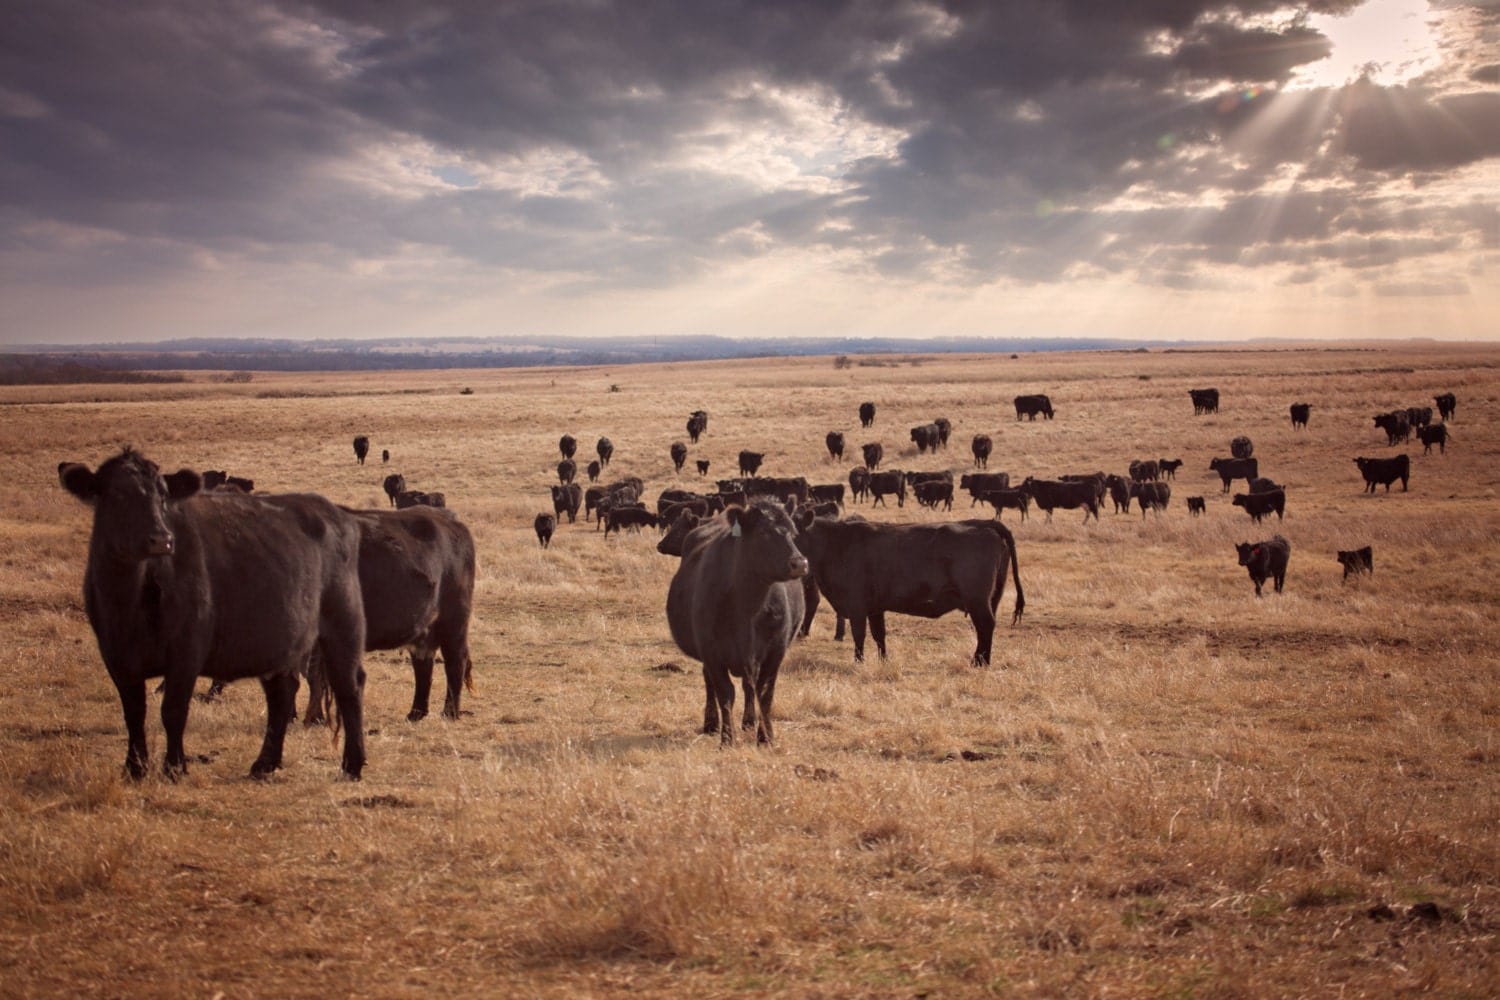 Teri James Photography Wall Art Paper Photo Print / 12 x 18 Inches Ranch Style Cattle Wall Art - Black Angus Cattle on the Prairie